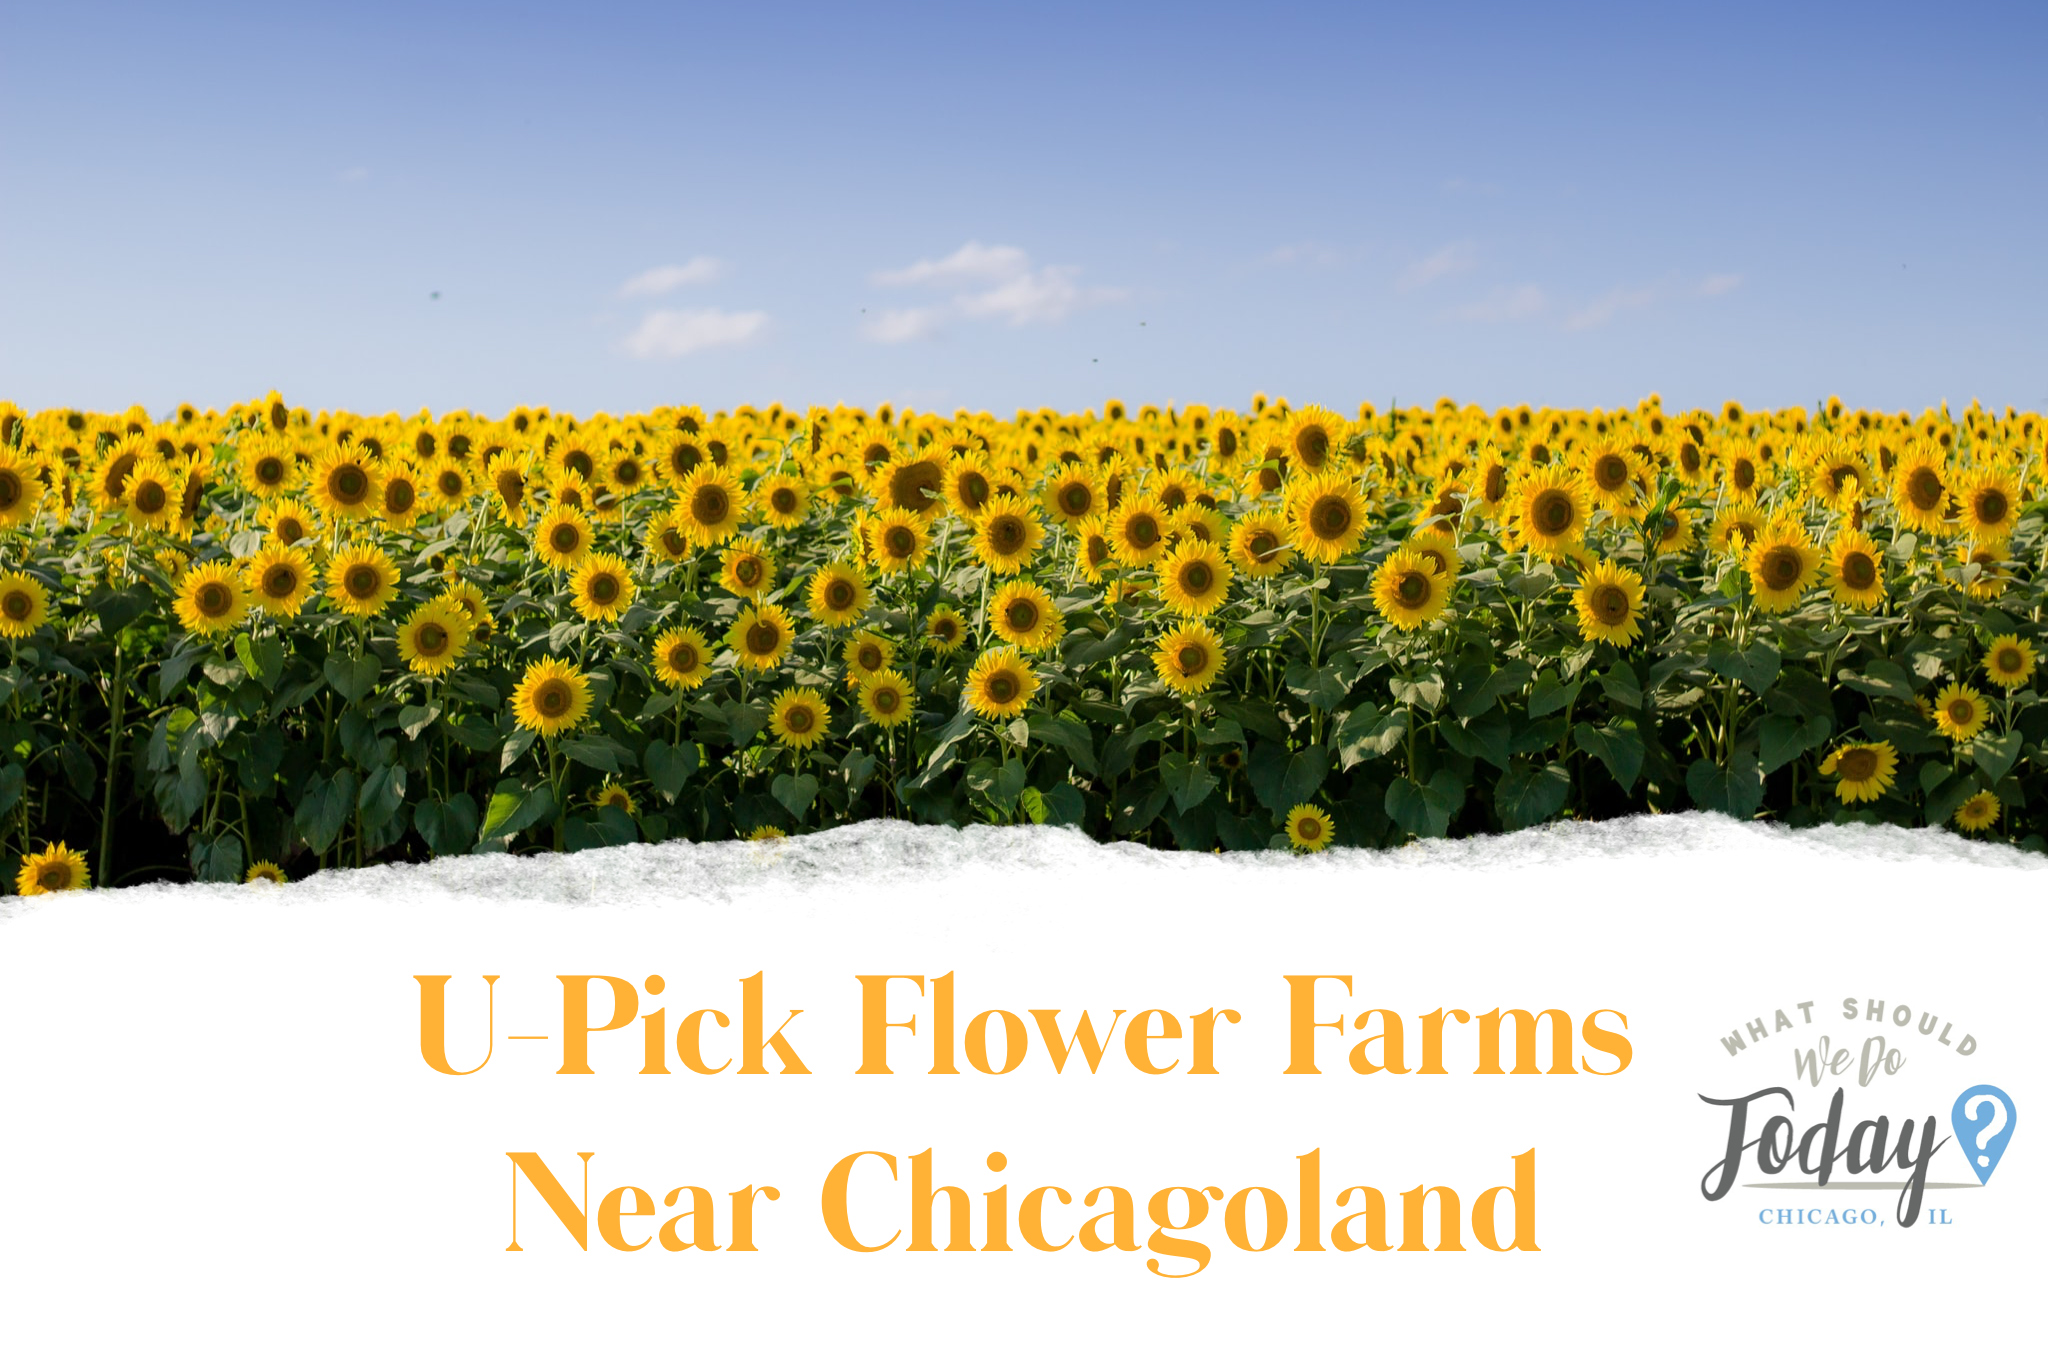 5 farms with flower patches in full bloom for photos, picking